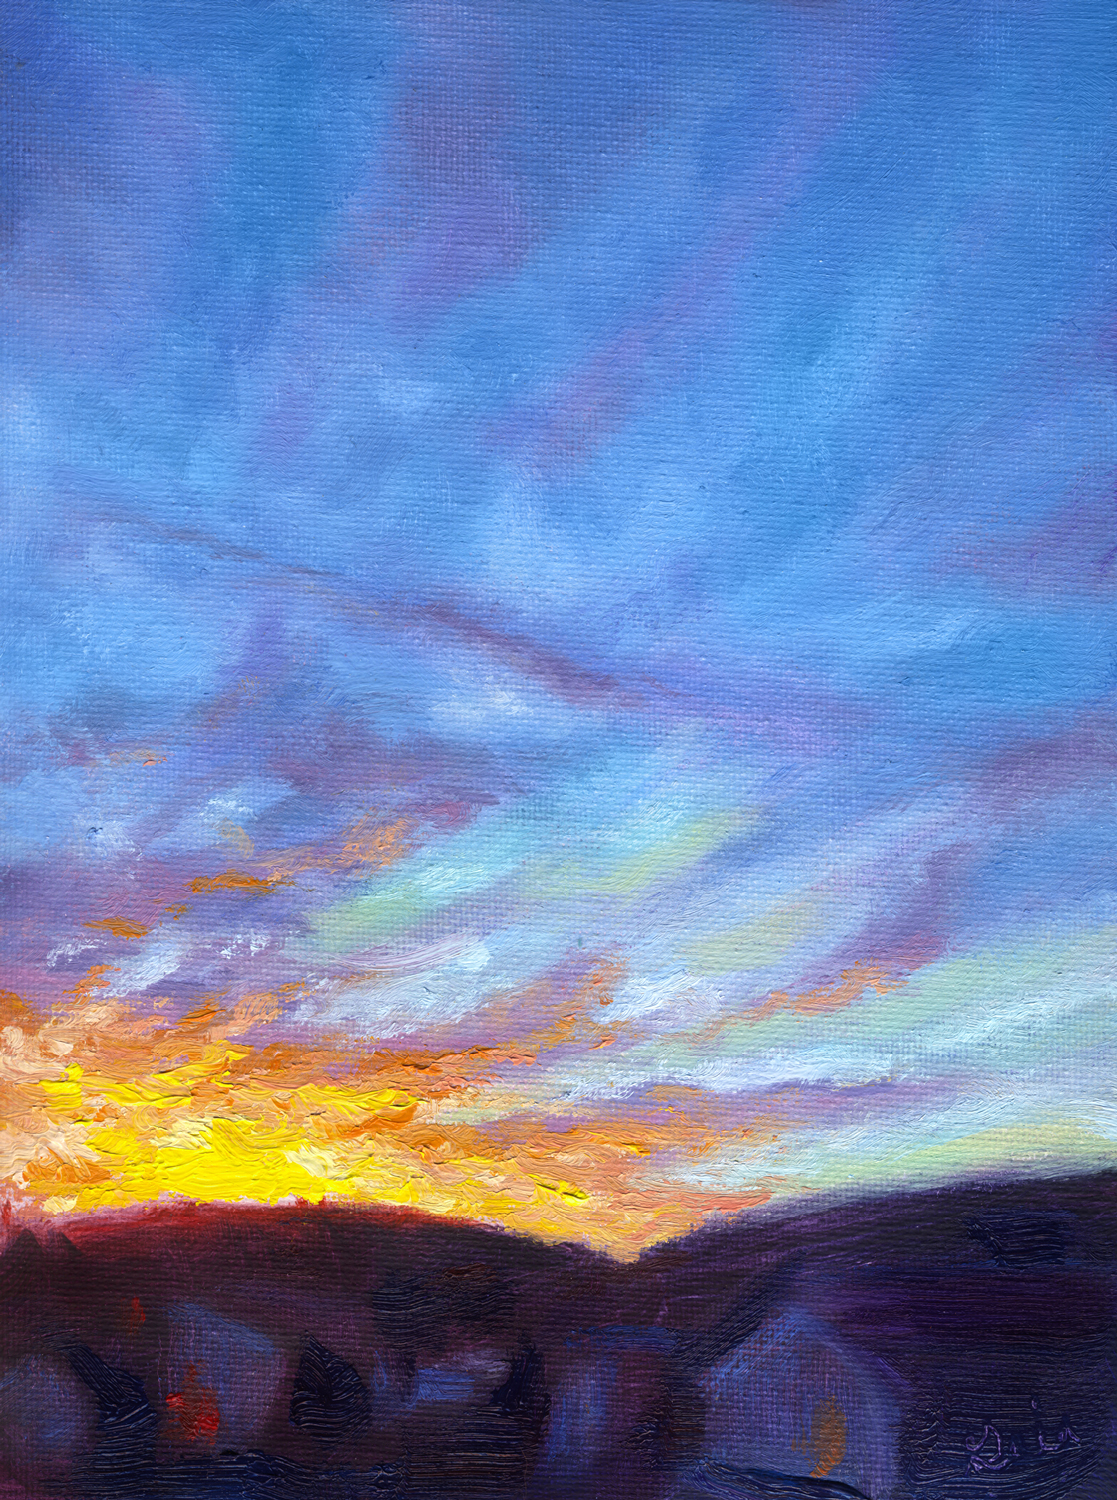 Small Town Skies Oil Painting, Original Landscape Paintings